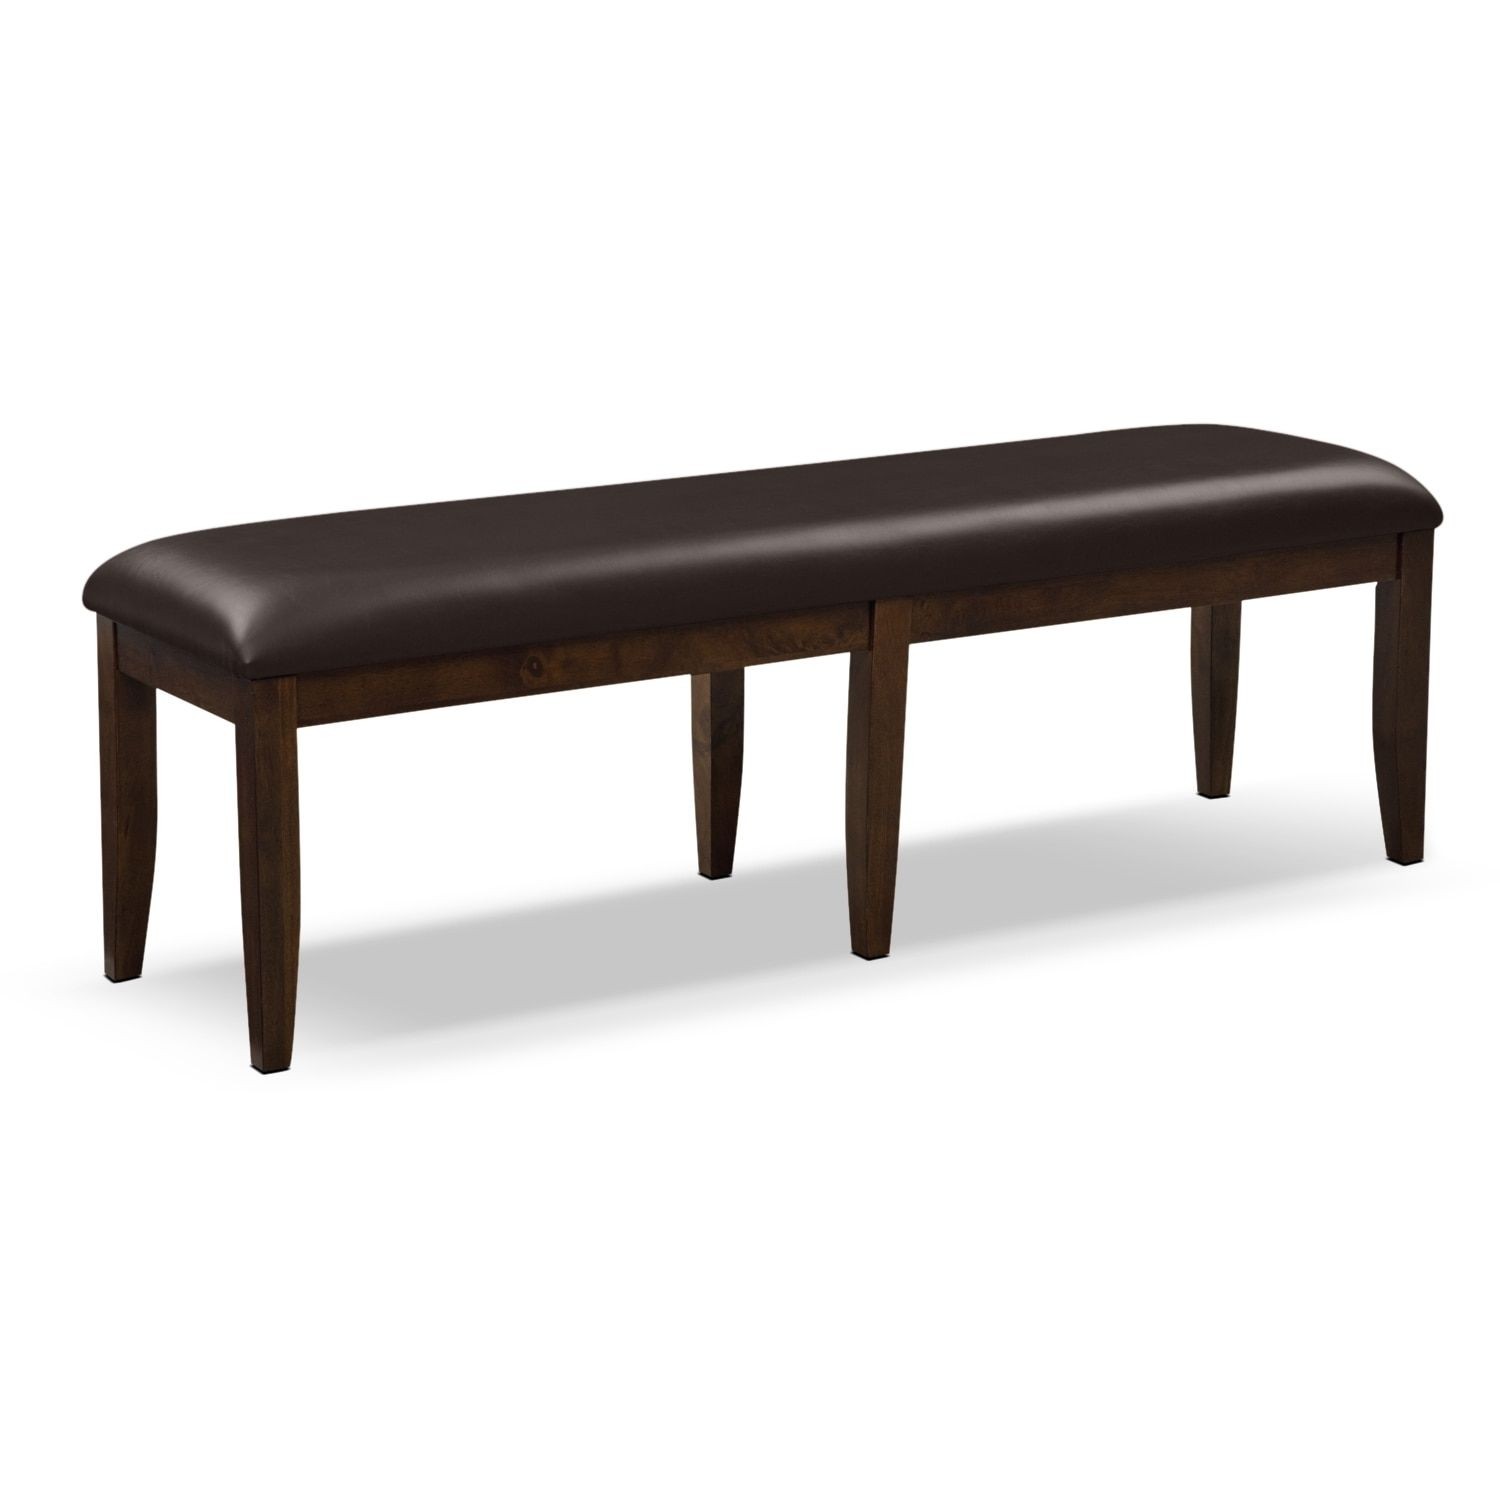 American signature furniture abaco dining room bench 199 99